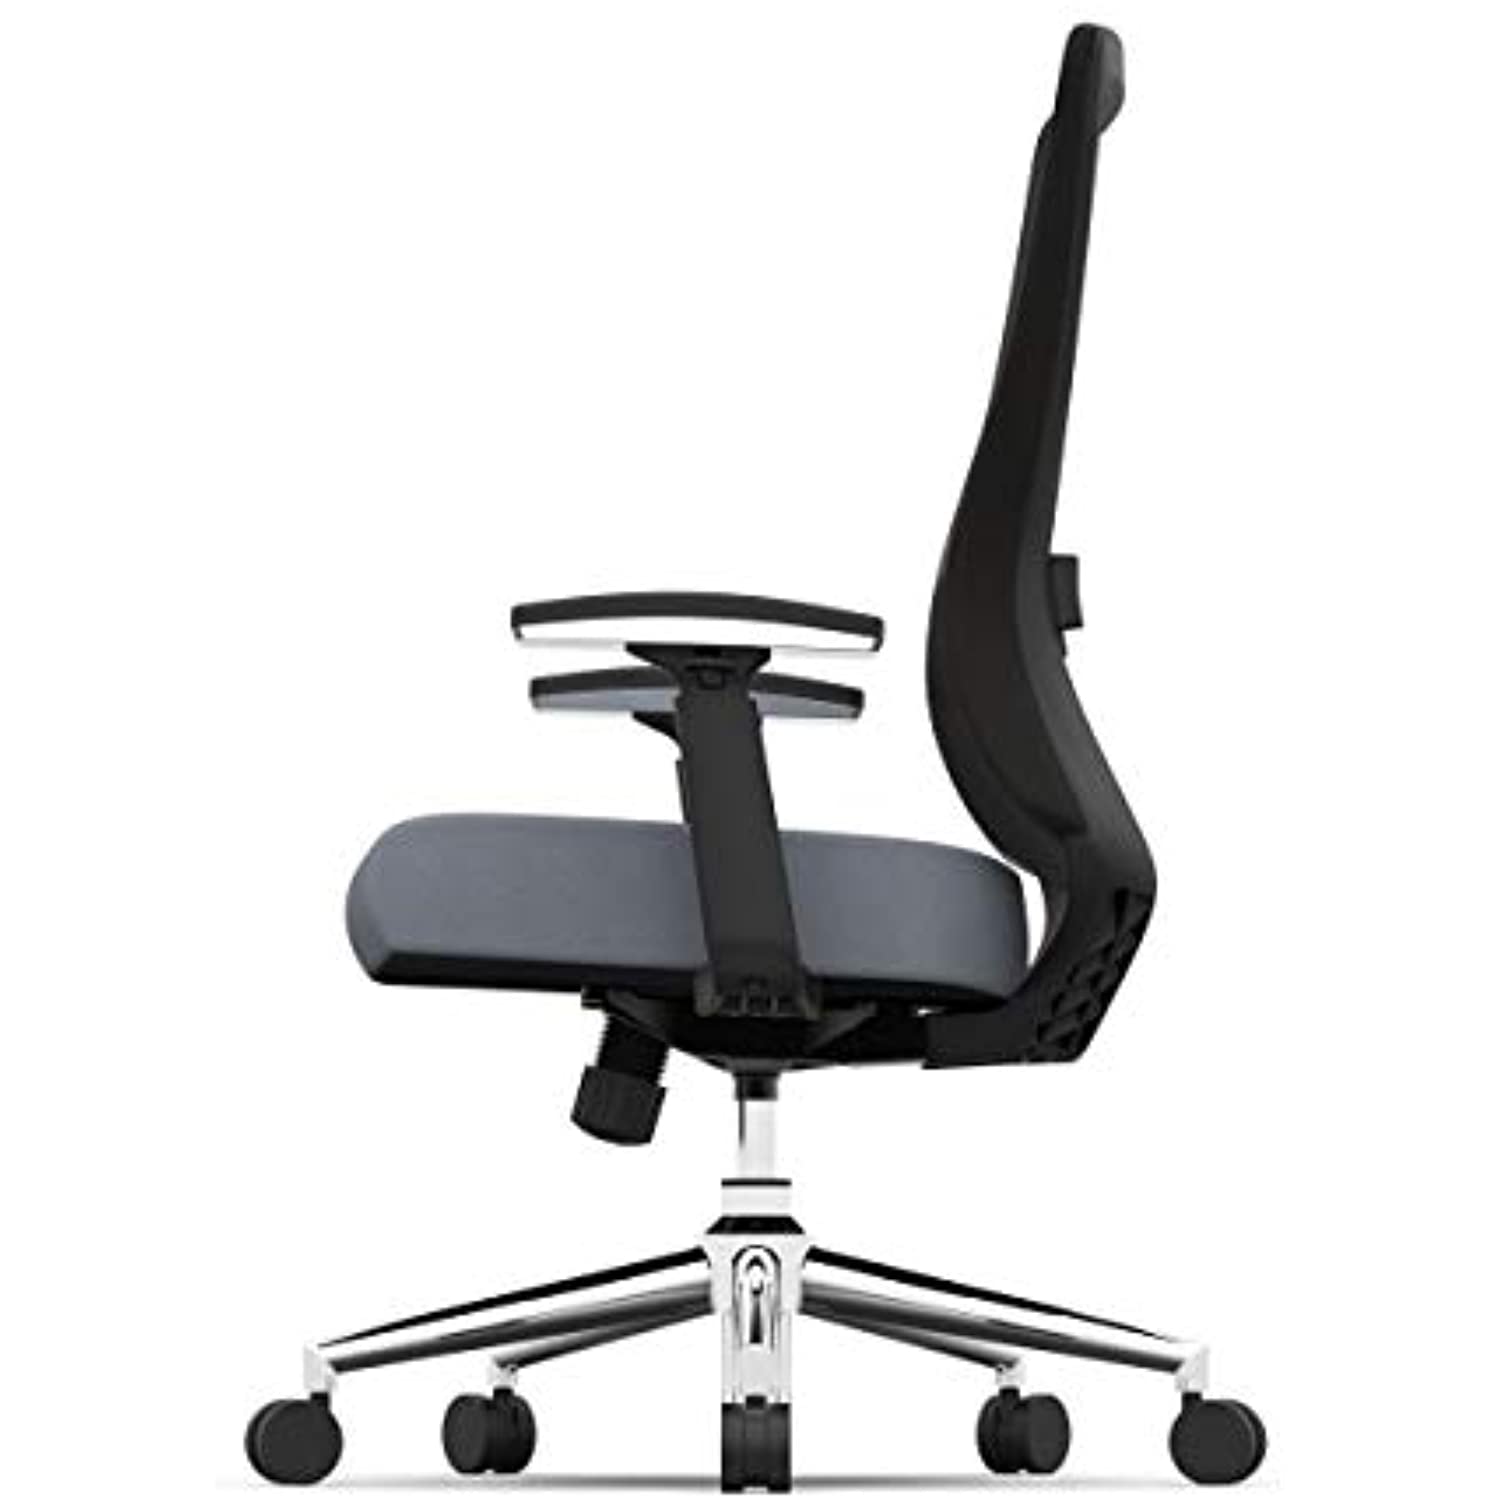 Realspace Levari Faux Leather Mid-Back Task Chair, Gray/Black - image 7 of 8